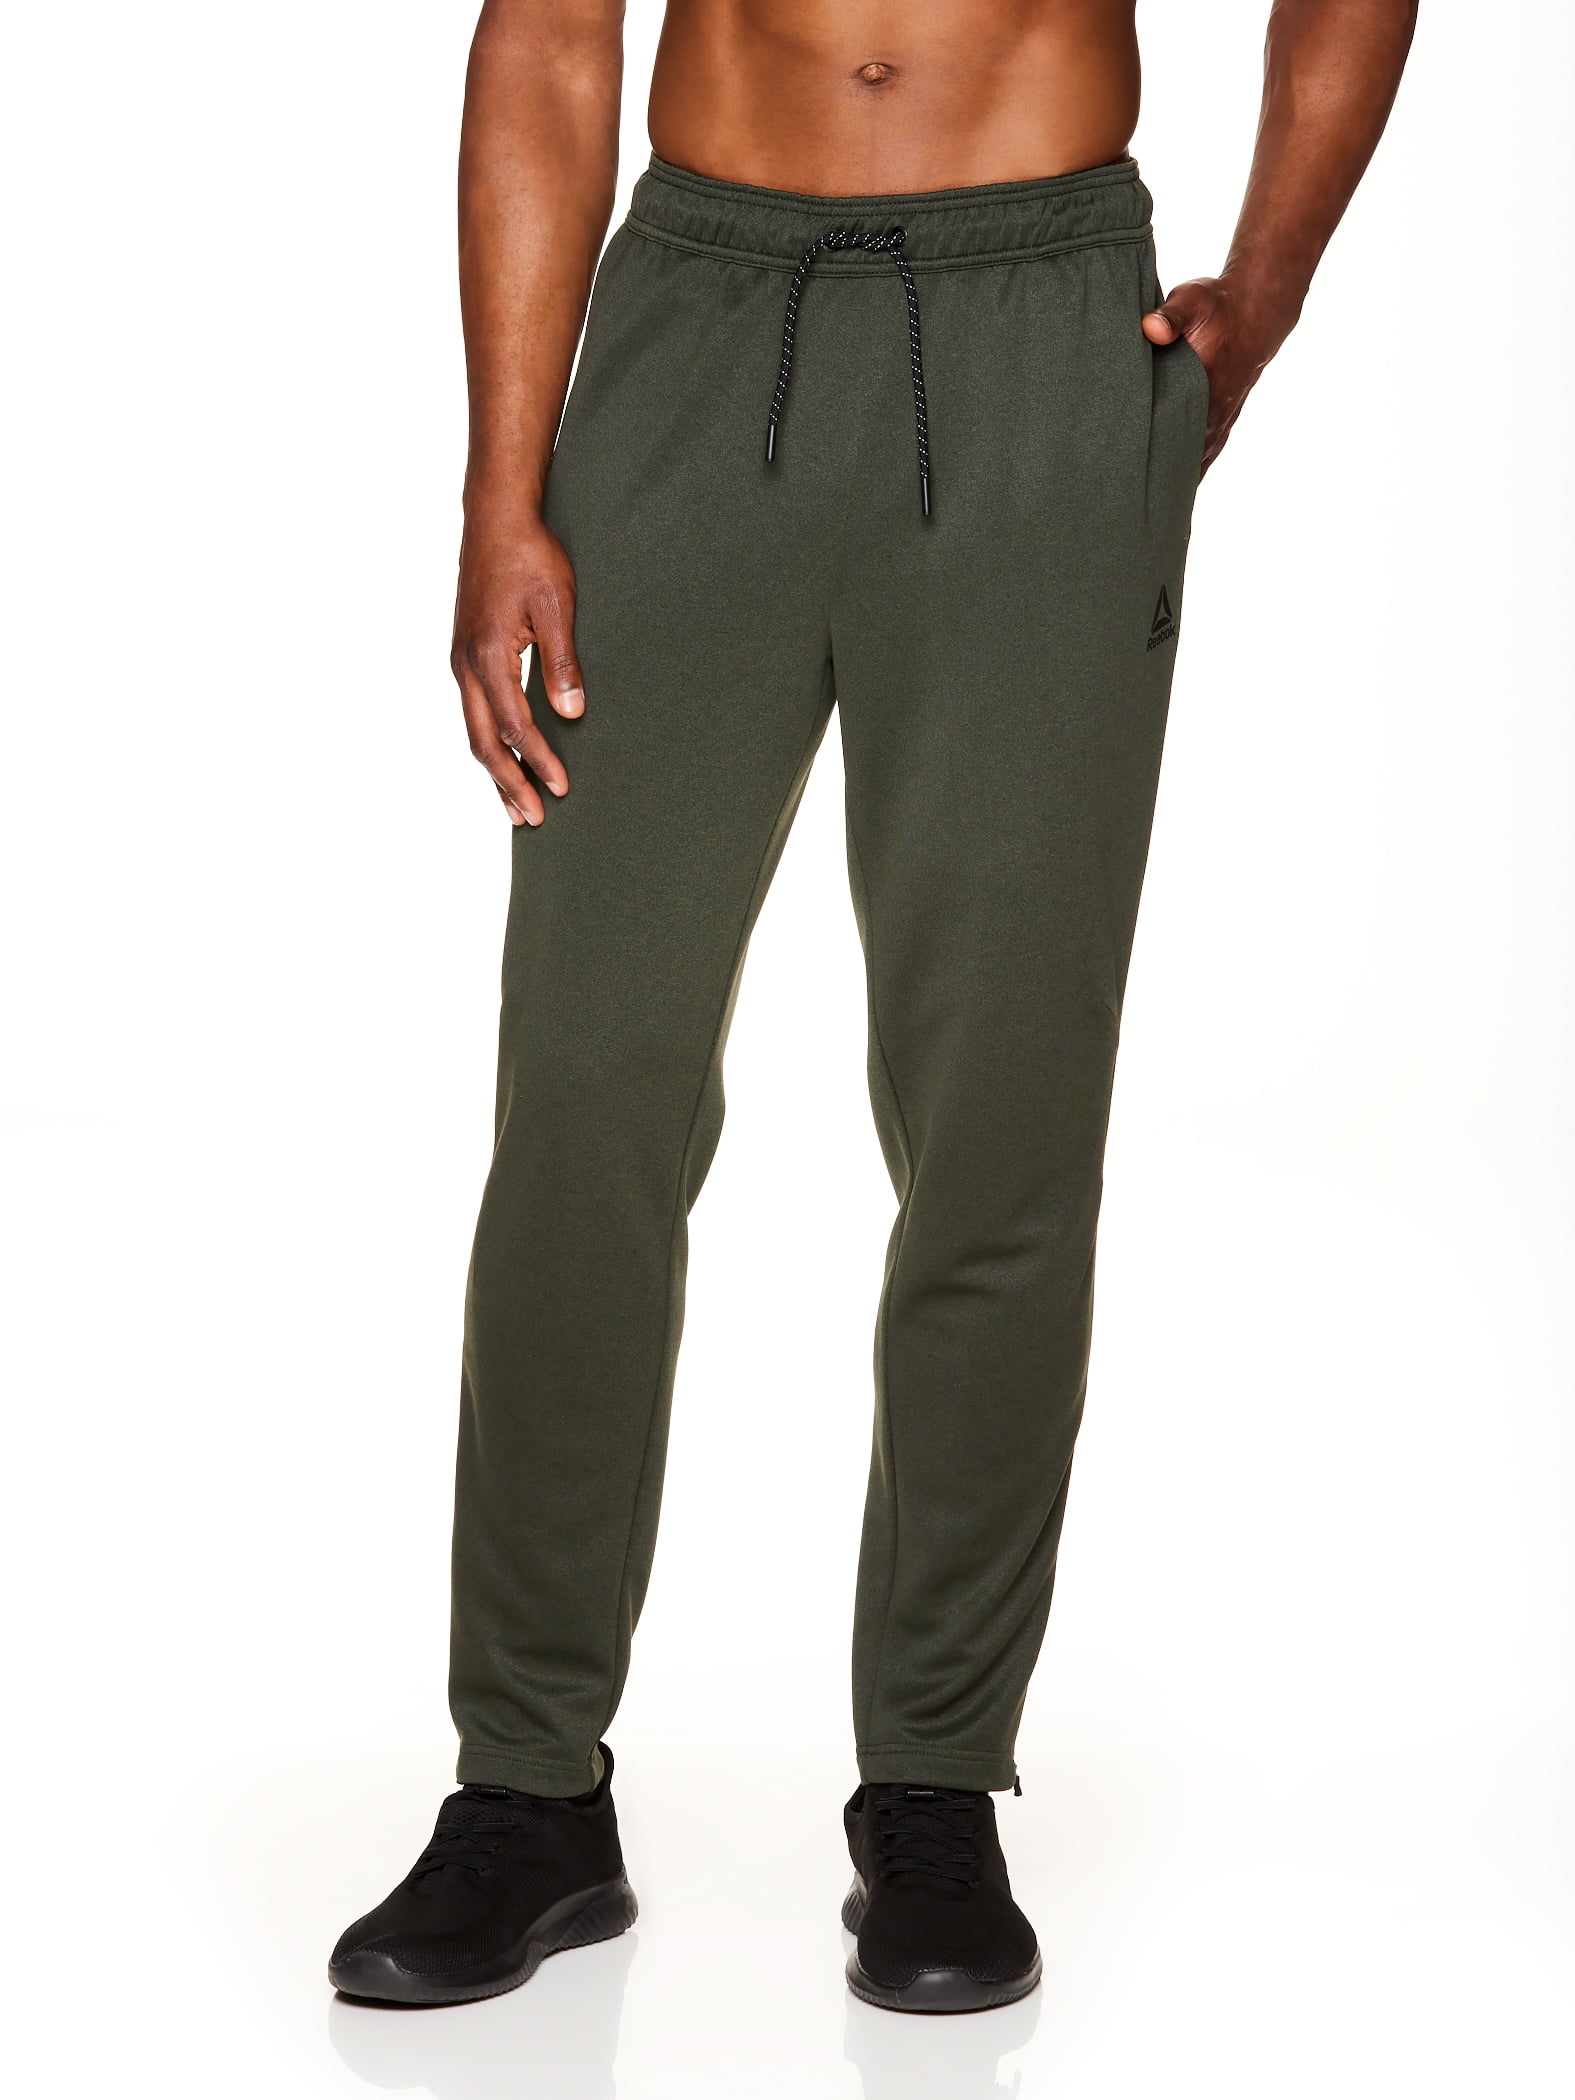 Active Intent Men's Stretch Tech Shell Pants Grey Dark | The Warehouse